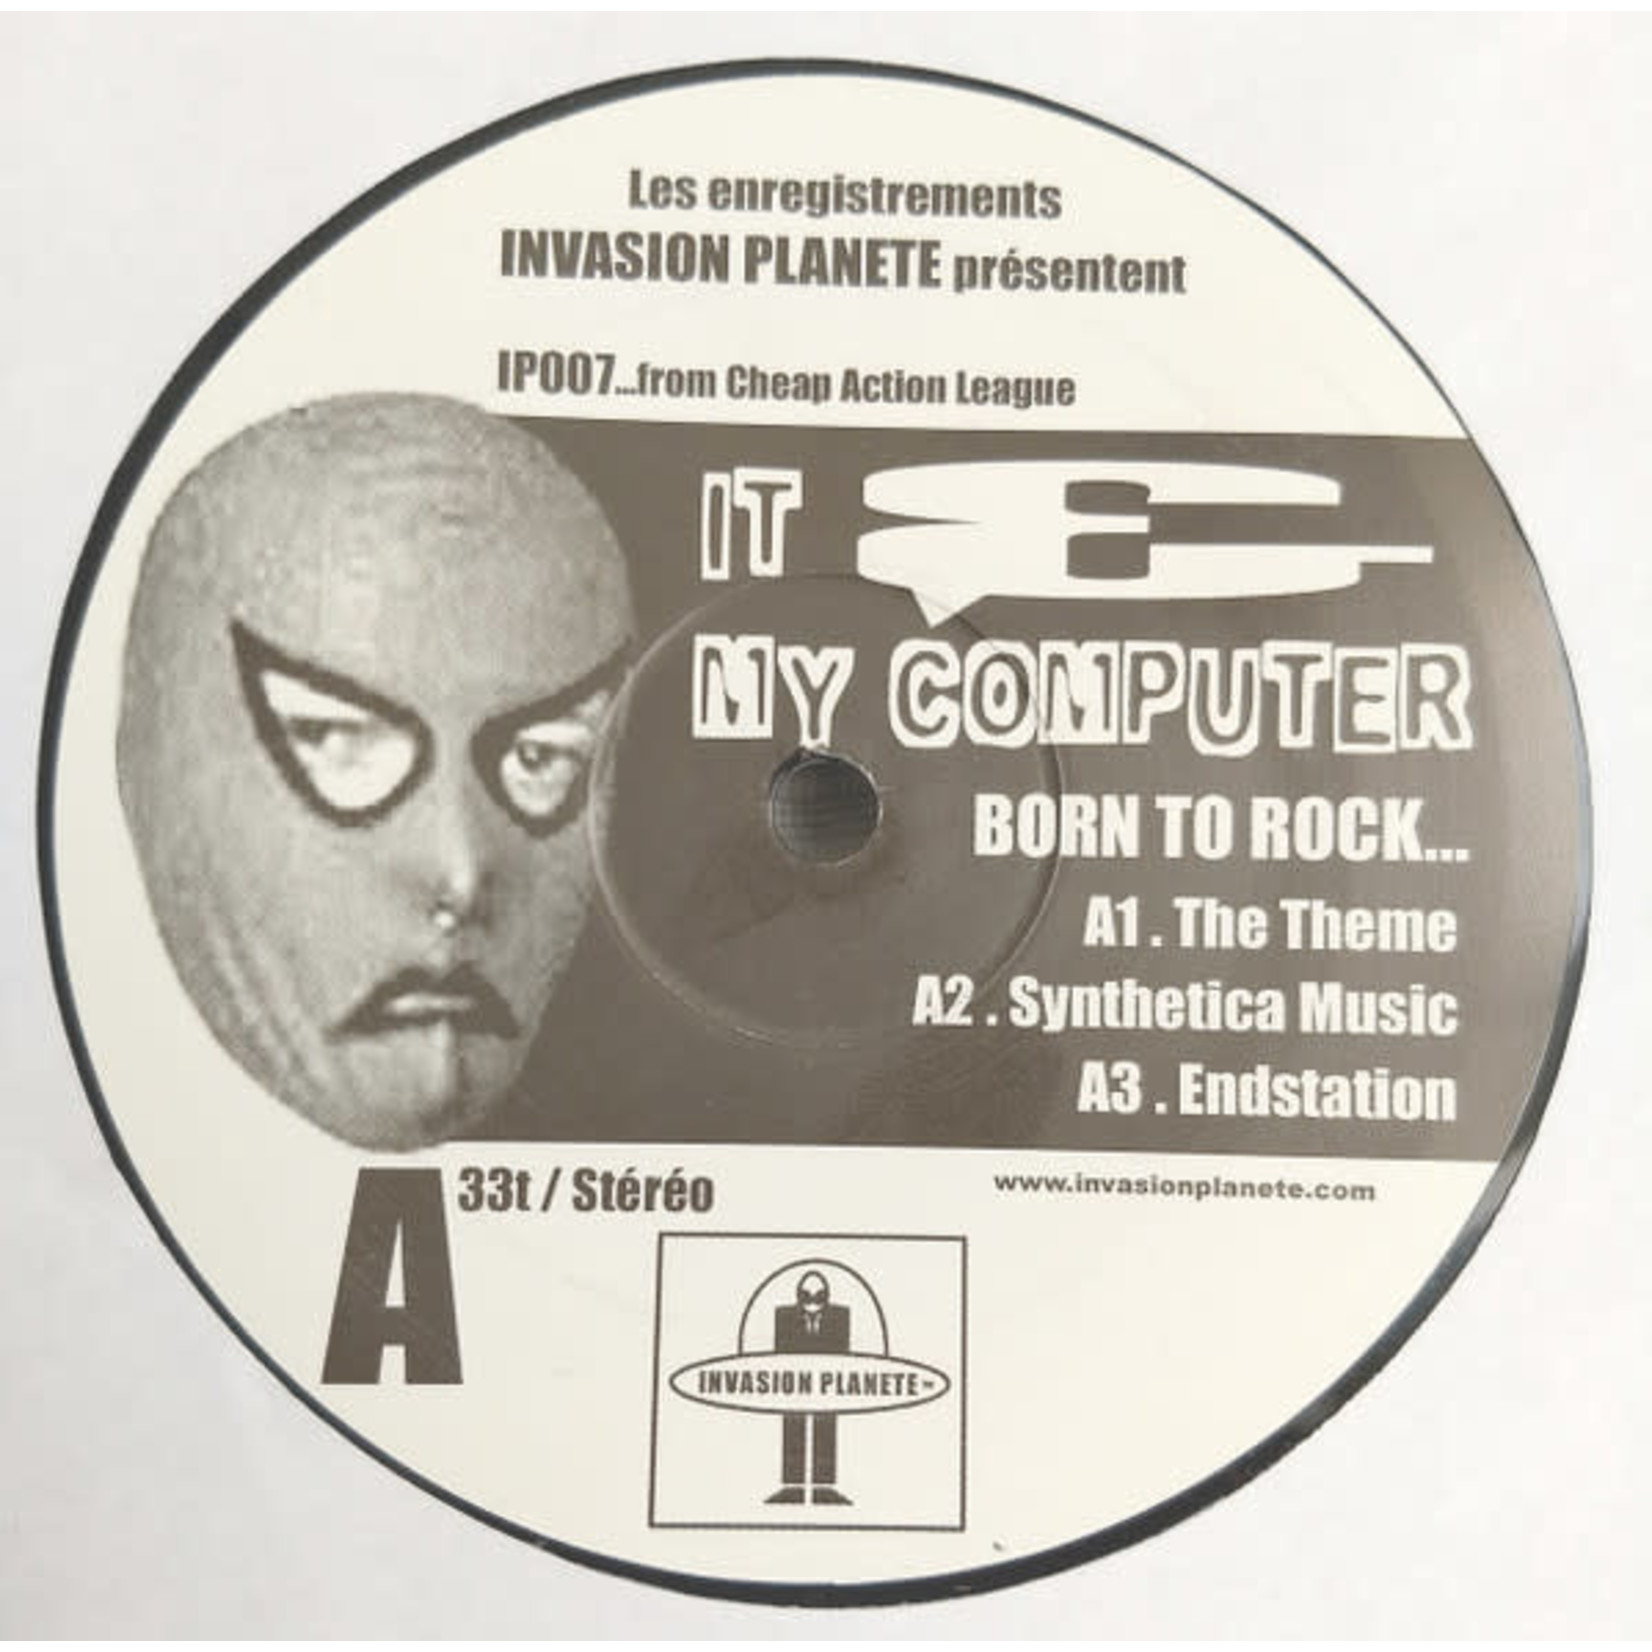 It & My Computer / Porn.Darsteller: From Cheap Action League - 2001 France (EP, VG, Ltd. Ed.) [KOLLECTIBLES]